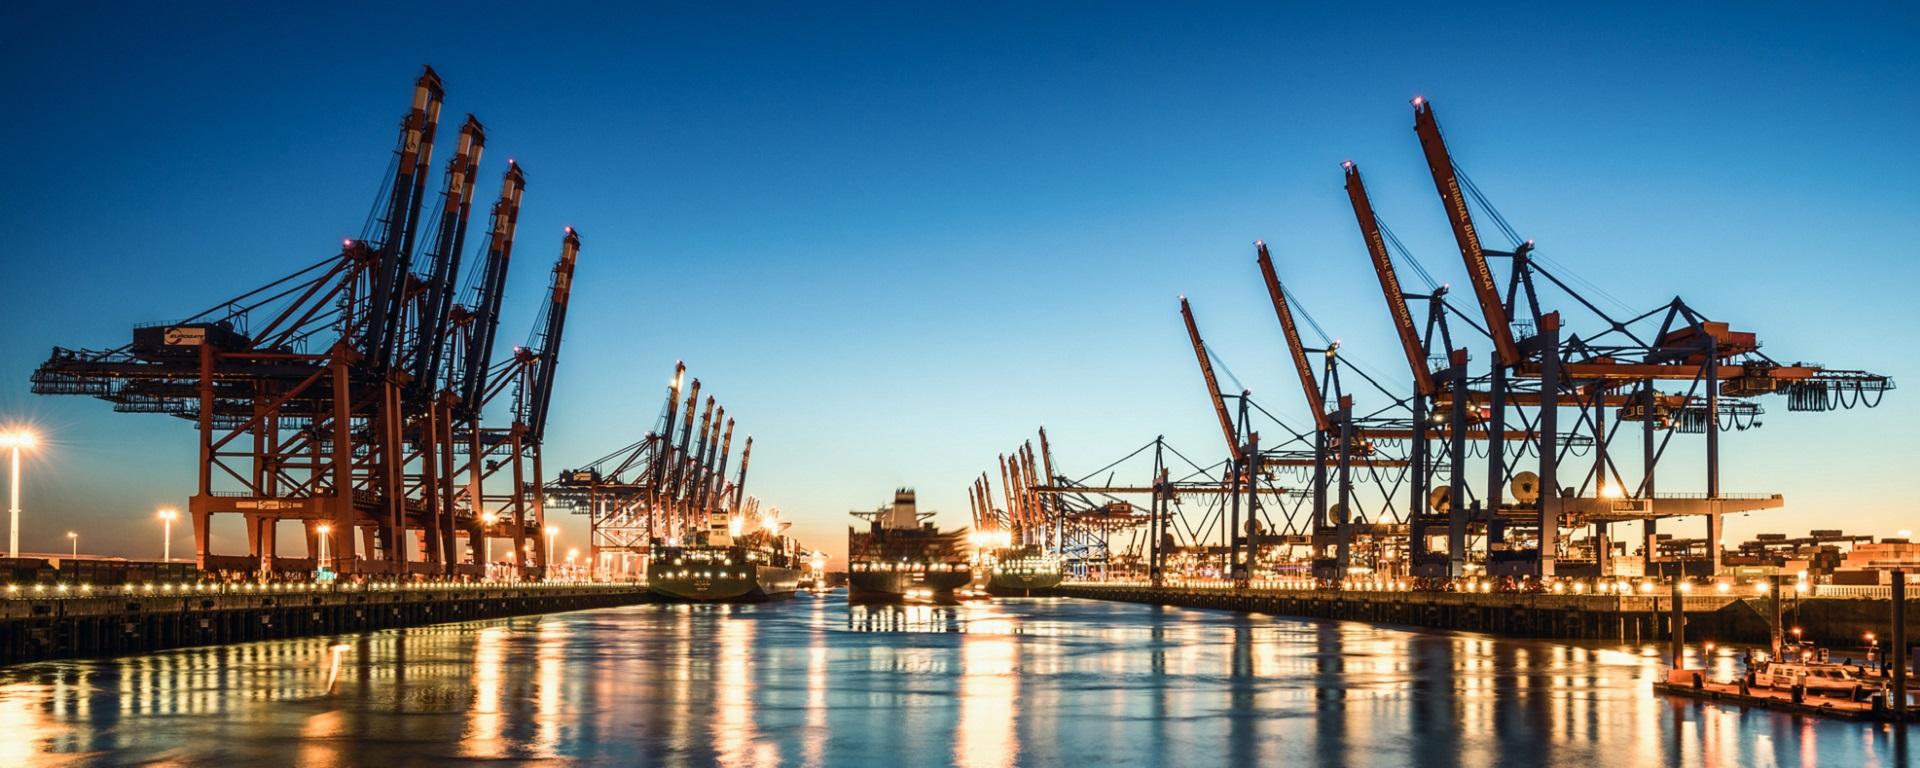 Hamburg's container port is the third largest container port in Europe. Source: Fotolia / davis